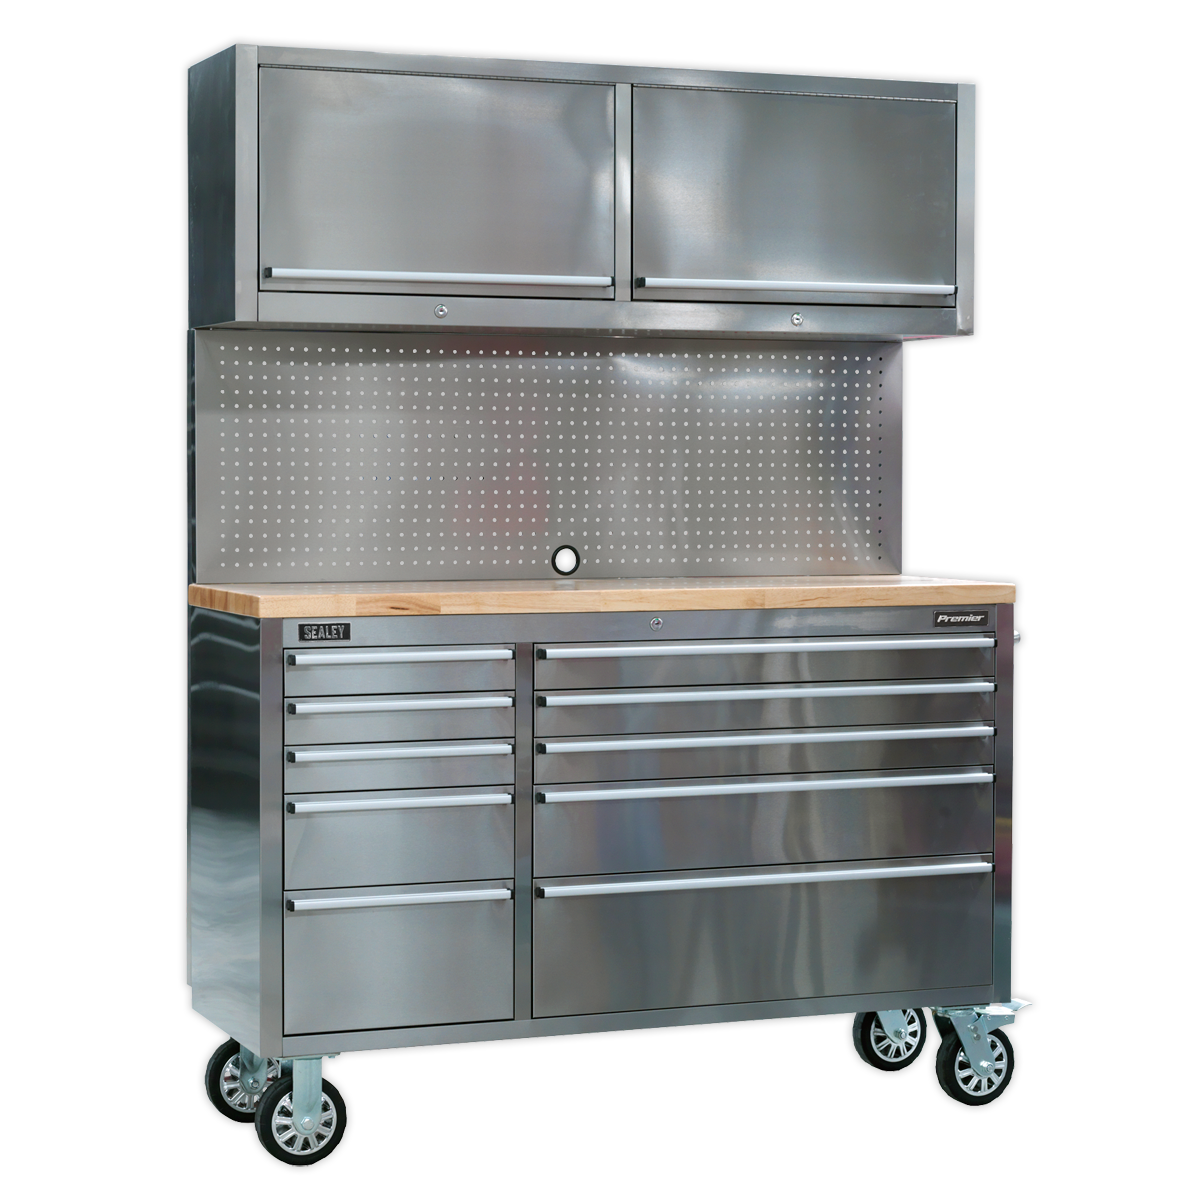 Sealey Mobile Stainless Steel Tool Cabinet 10 Drawer with Backboard & 2 Wall Cupboards